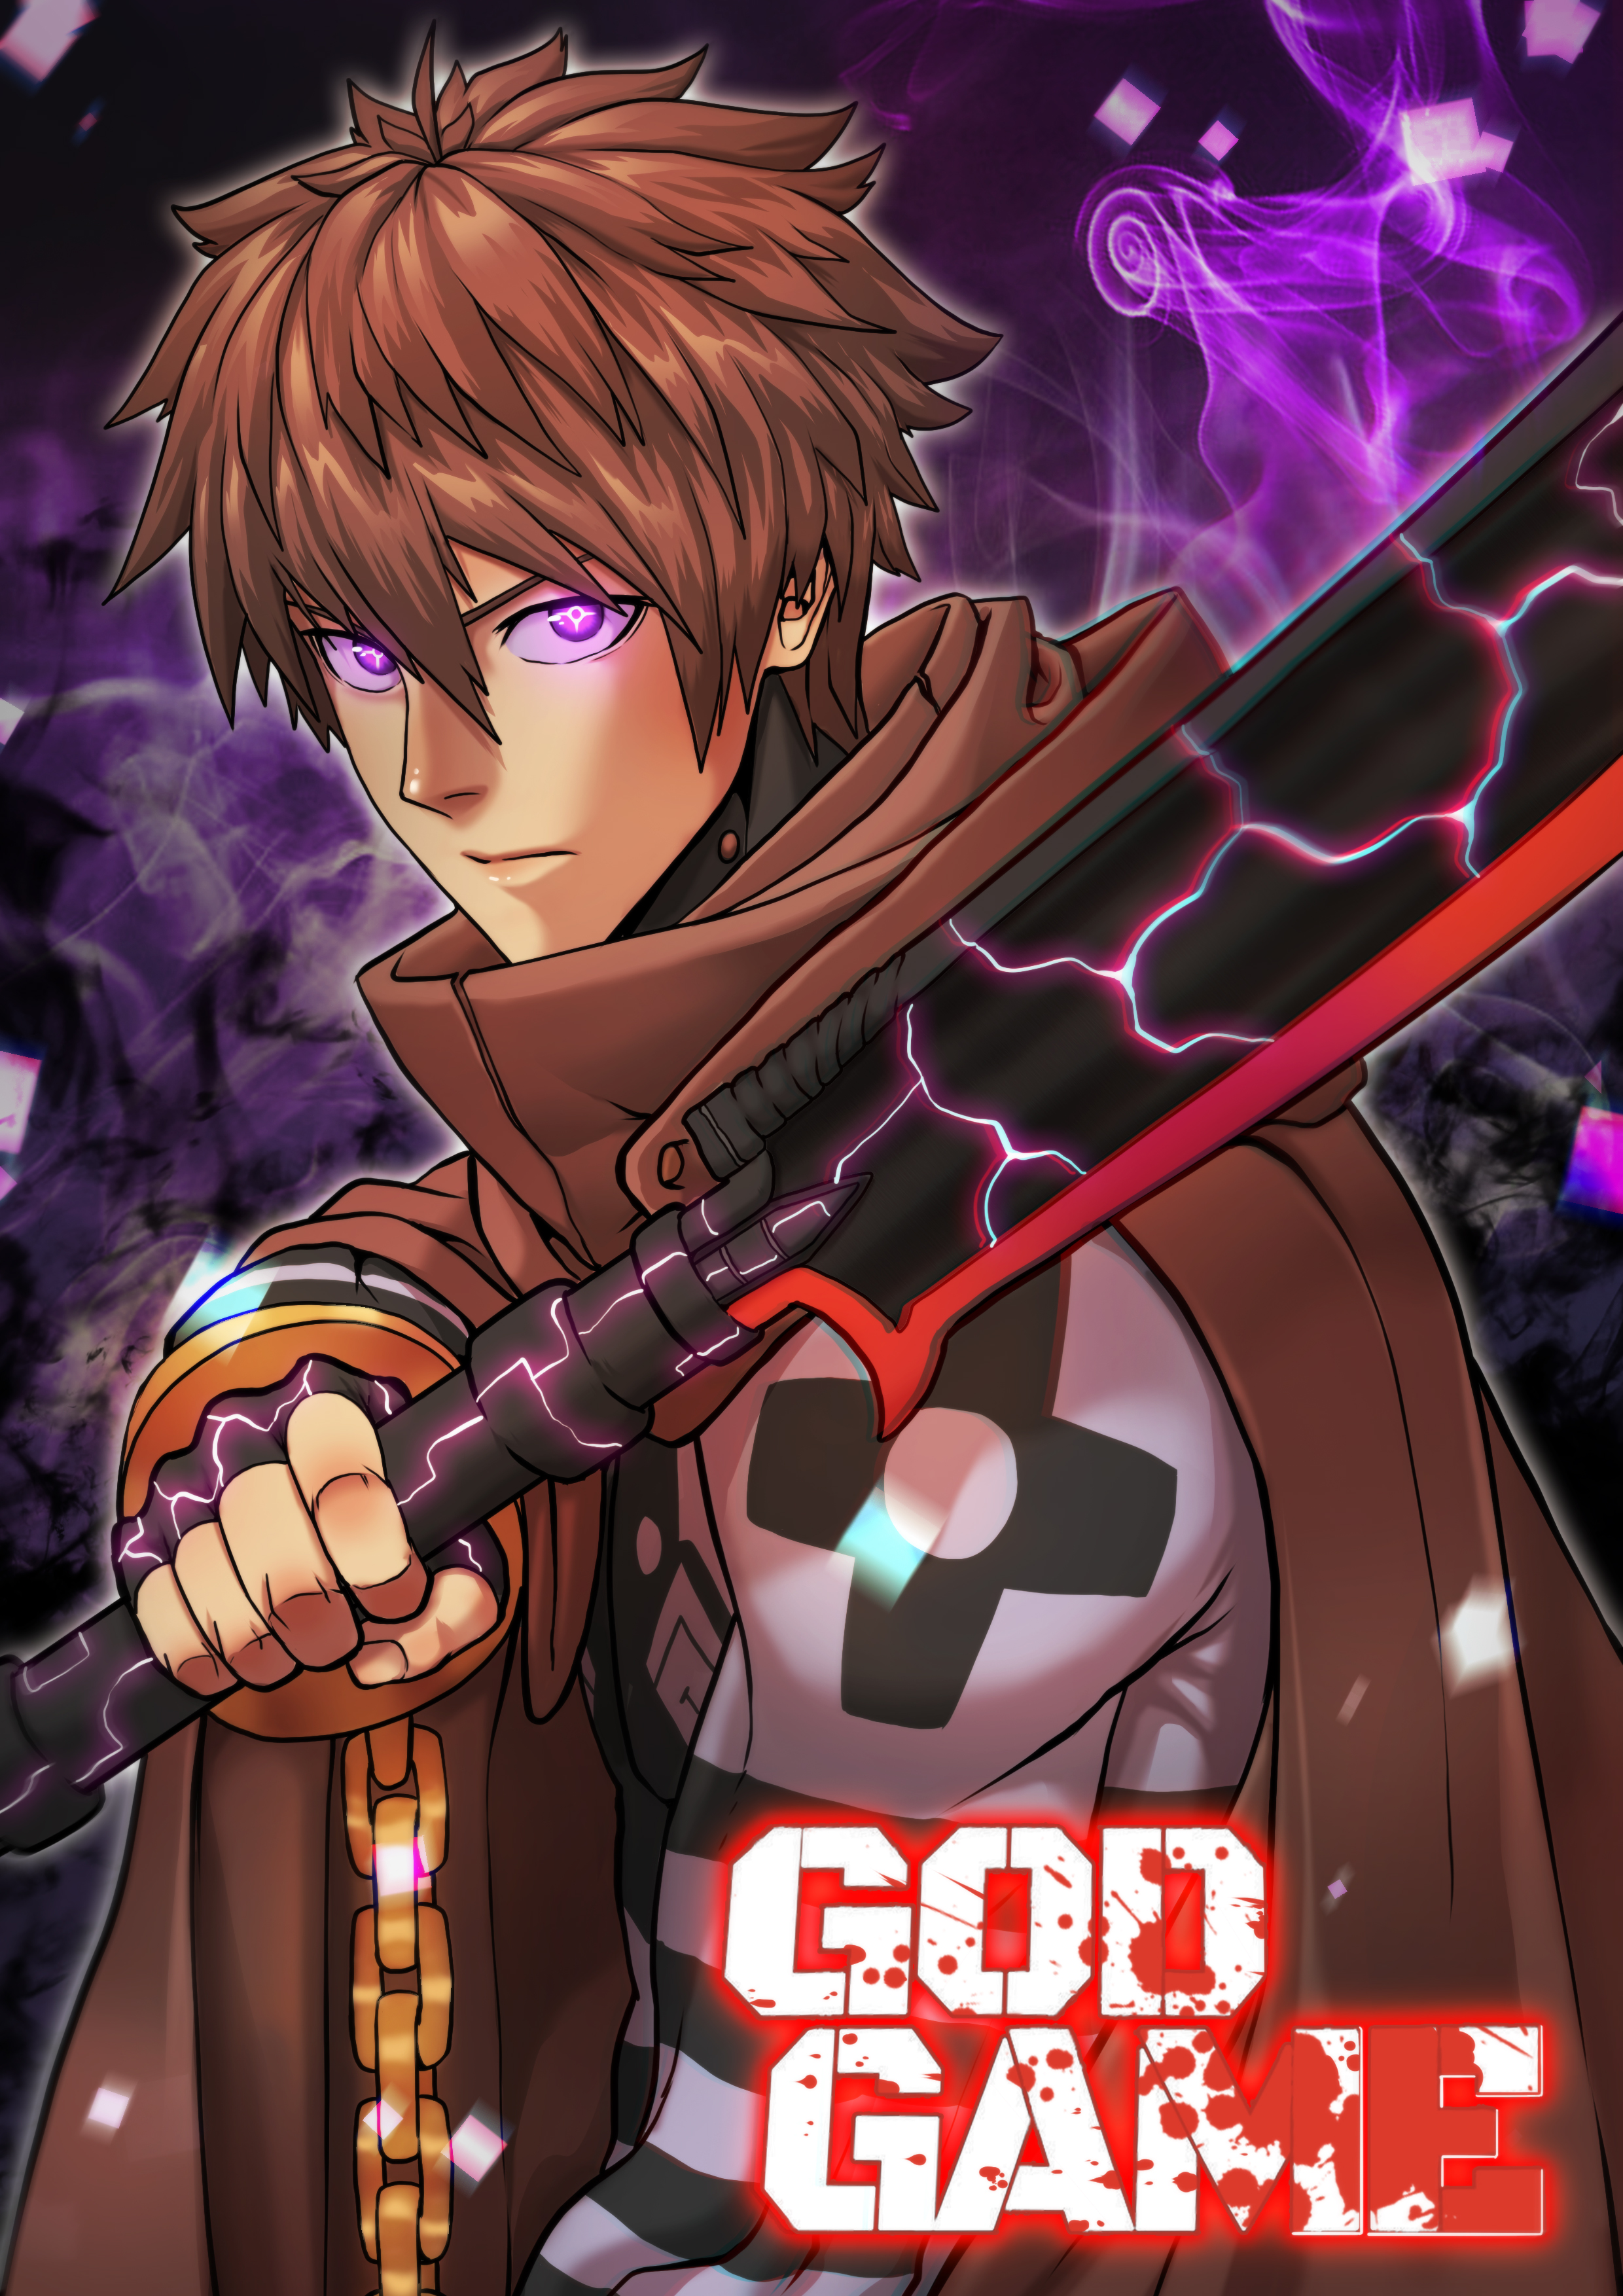 Share 70+ god game anime - in.cdgdbentre